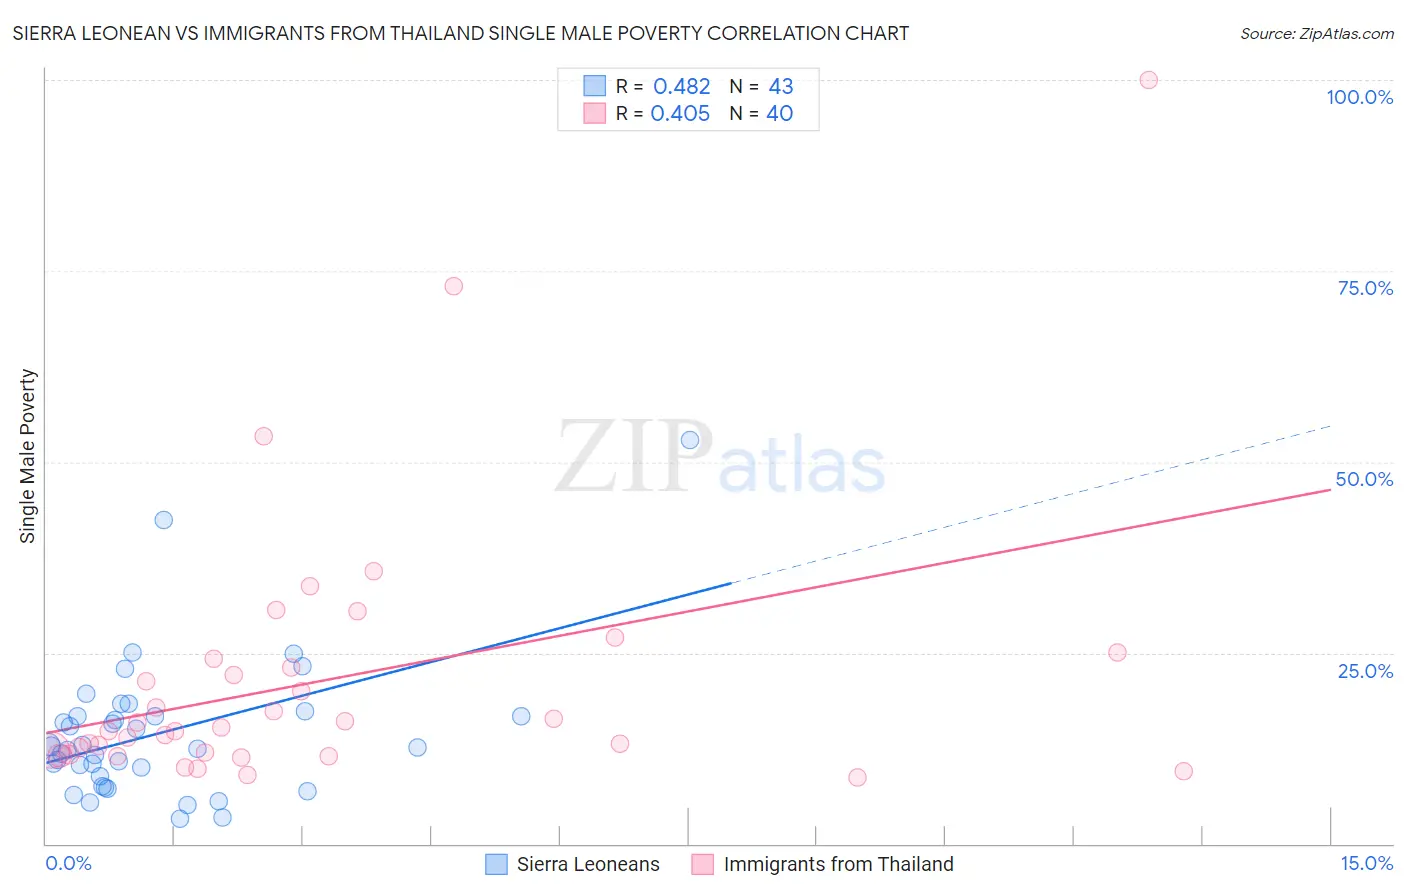 Sierra Leonean vs Immigrants from Thailand Single Male Poverty